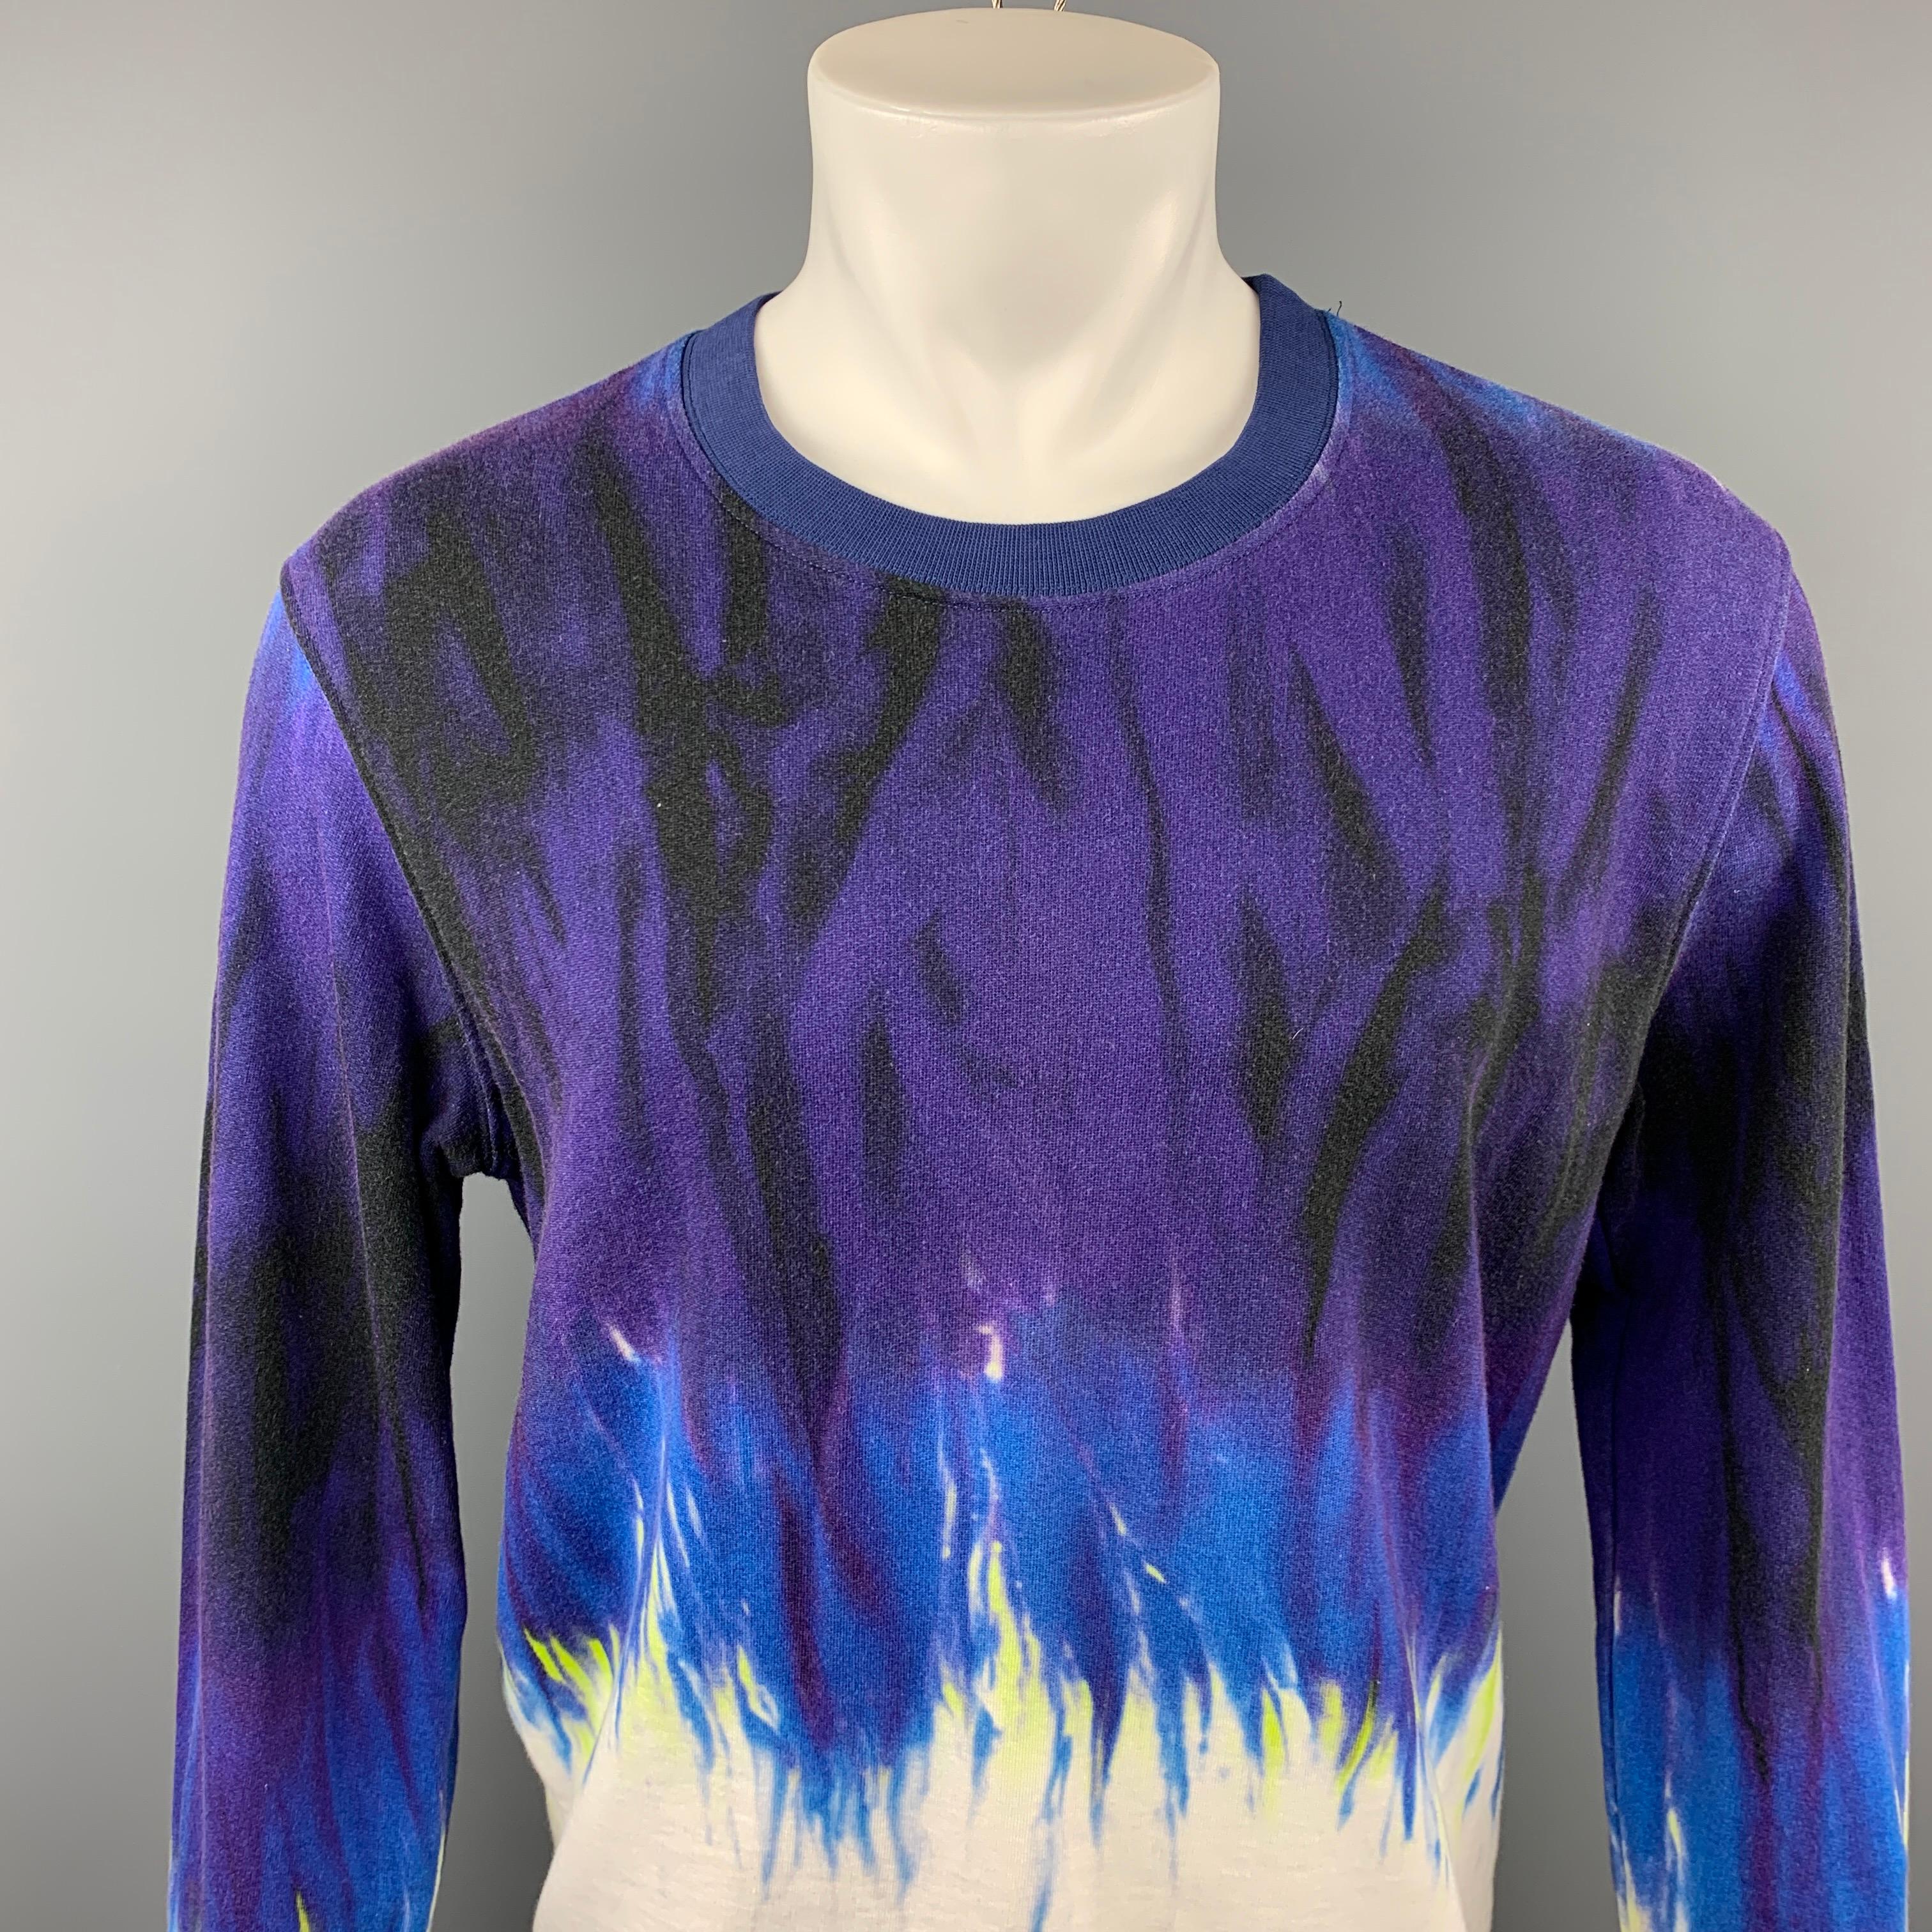 MSGM sweatshirt comes in a purple & white tie dye cotton featuring a crew-neck. Made in Italy.

Very Good Pre-Owned Condition.
Marked: S

Measurements:

Shoulder: 20 in.
Chest: 44 in.
Sleeve: 27 in.
Length: 25.5 in. 